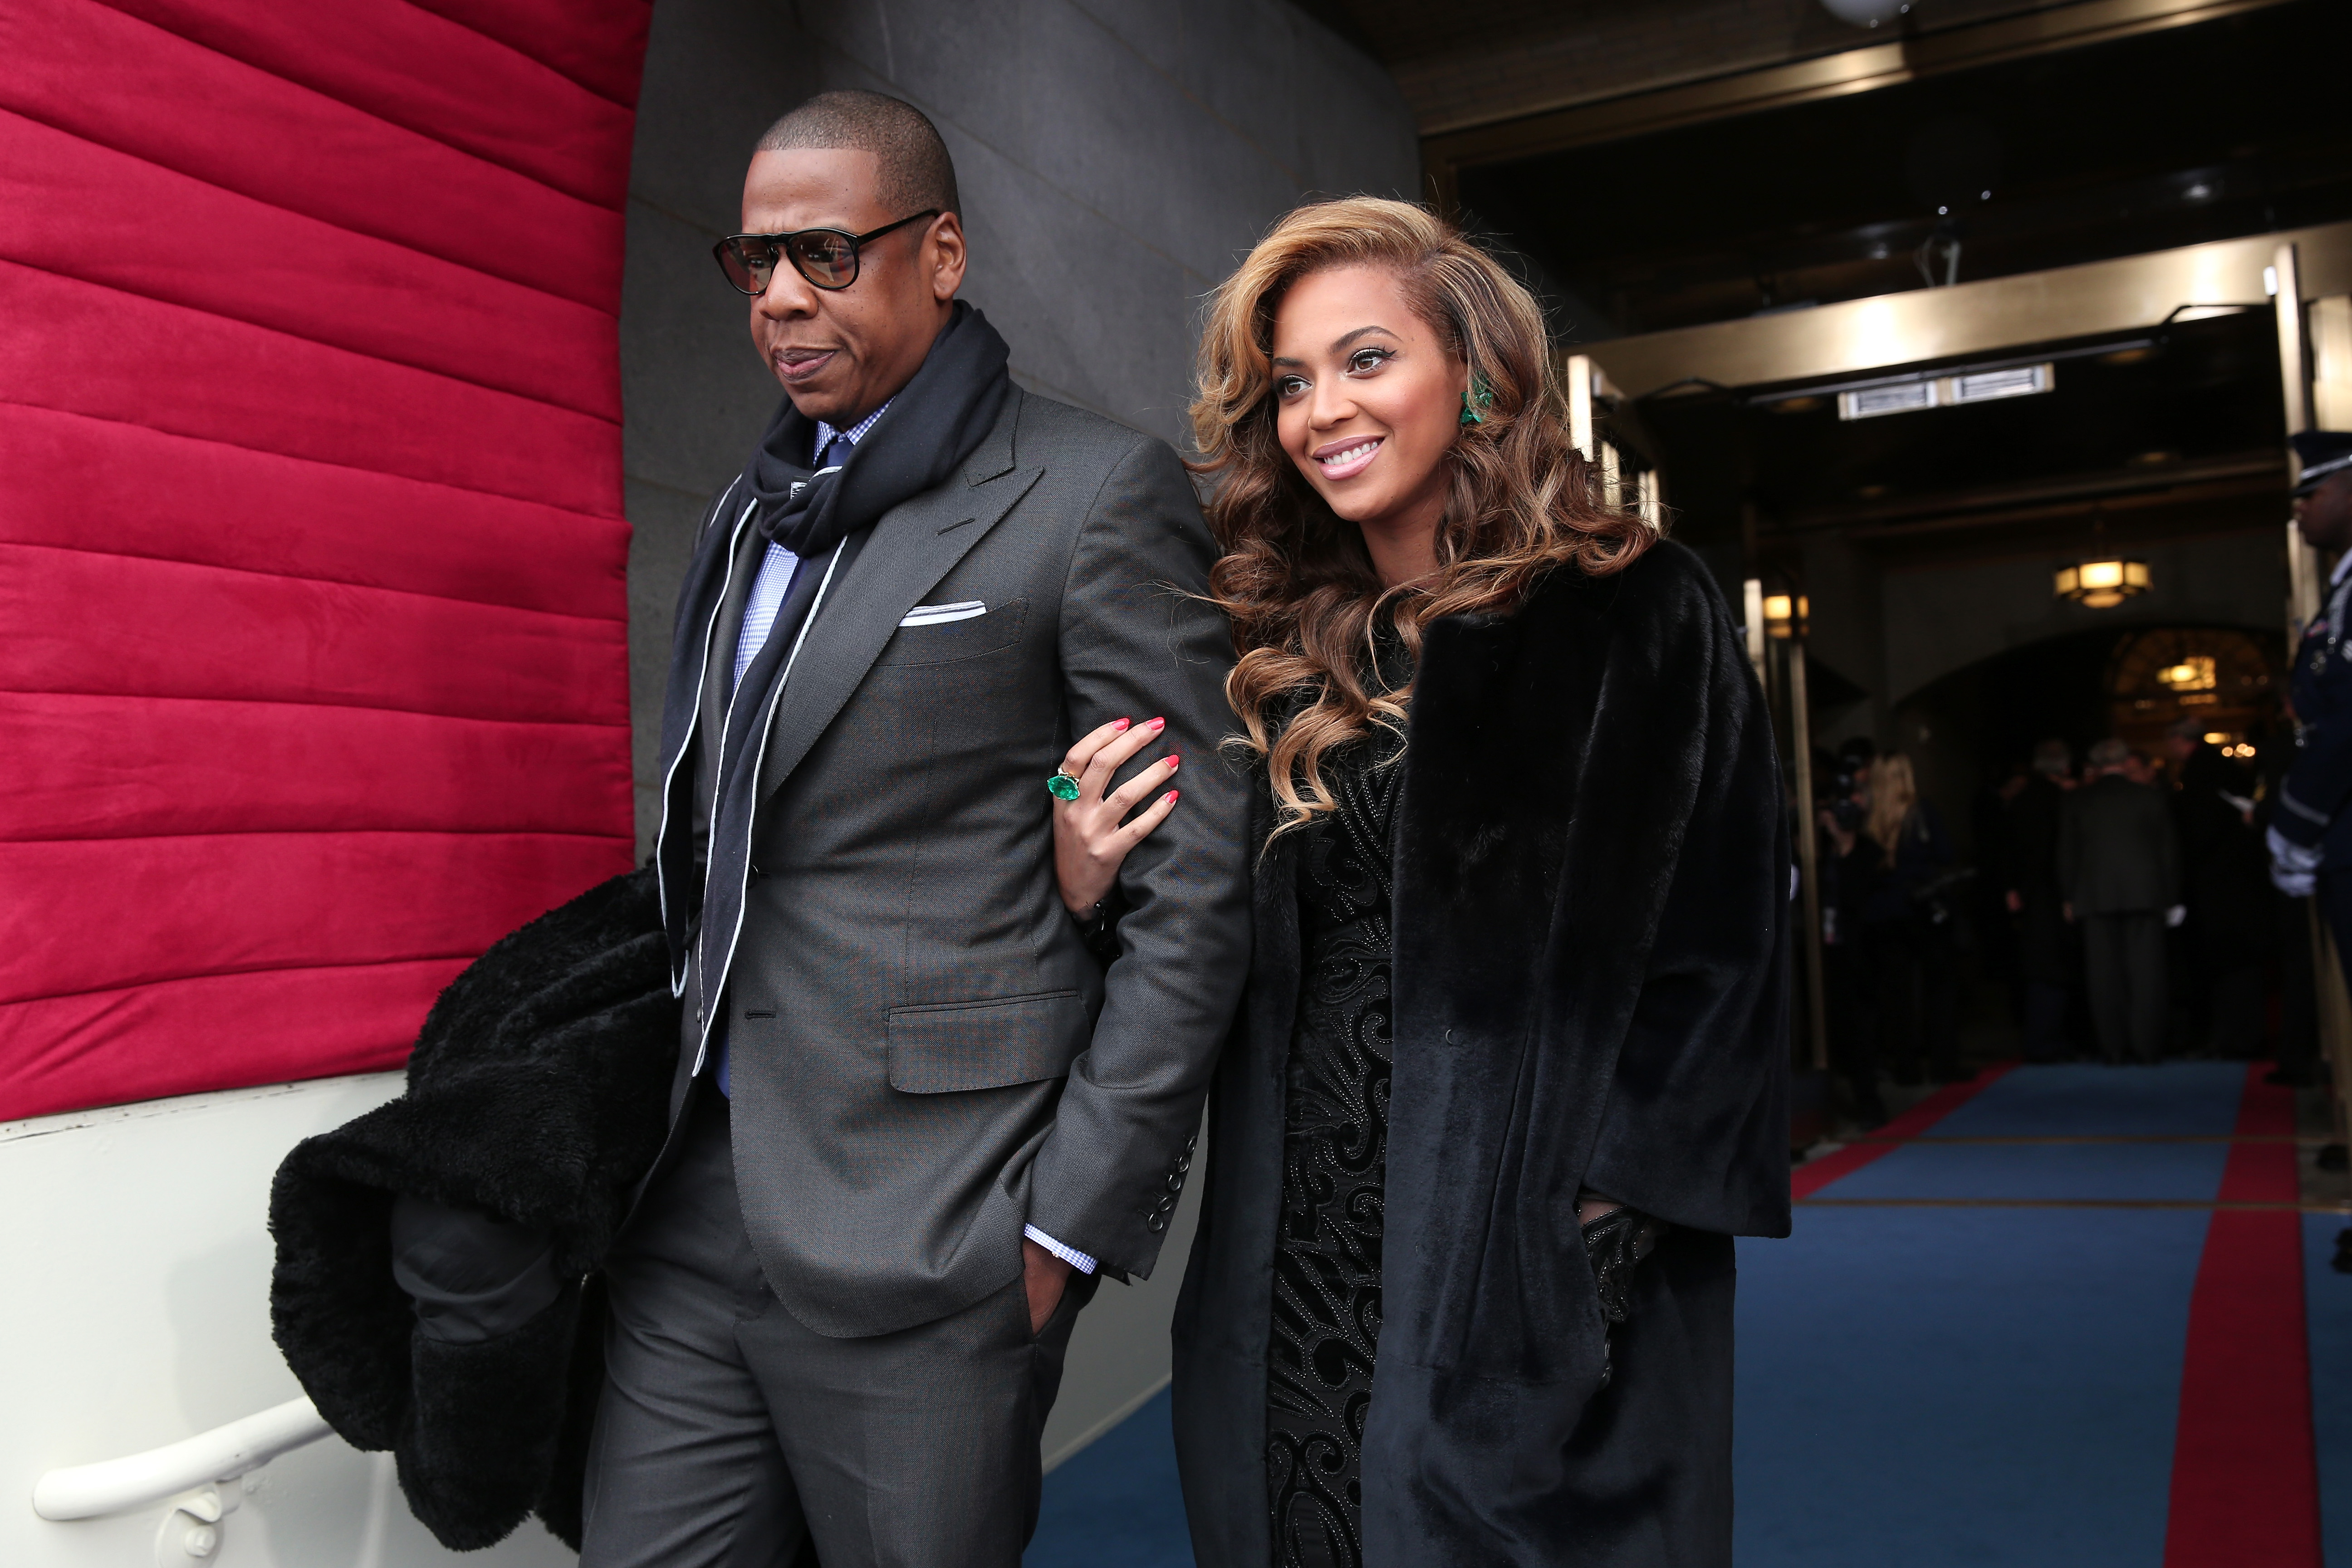 Beyonce Makes A Surprise Appearance At London Film Festival With Jay-Z